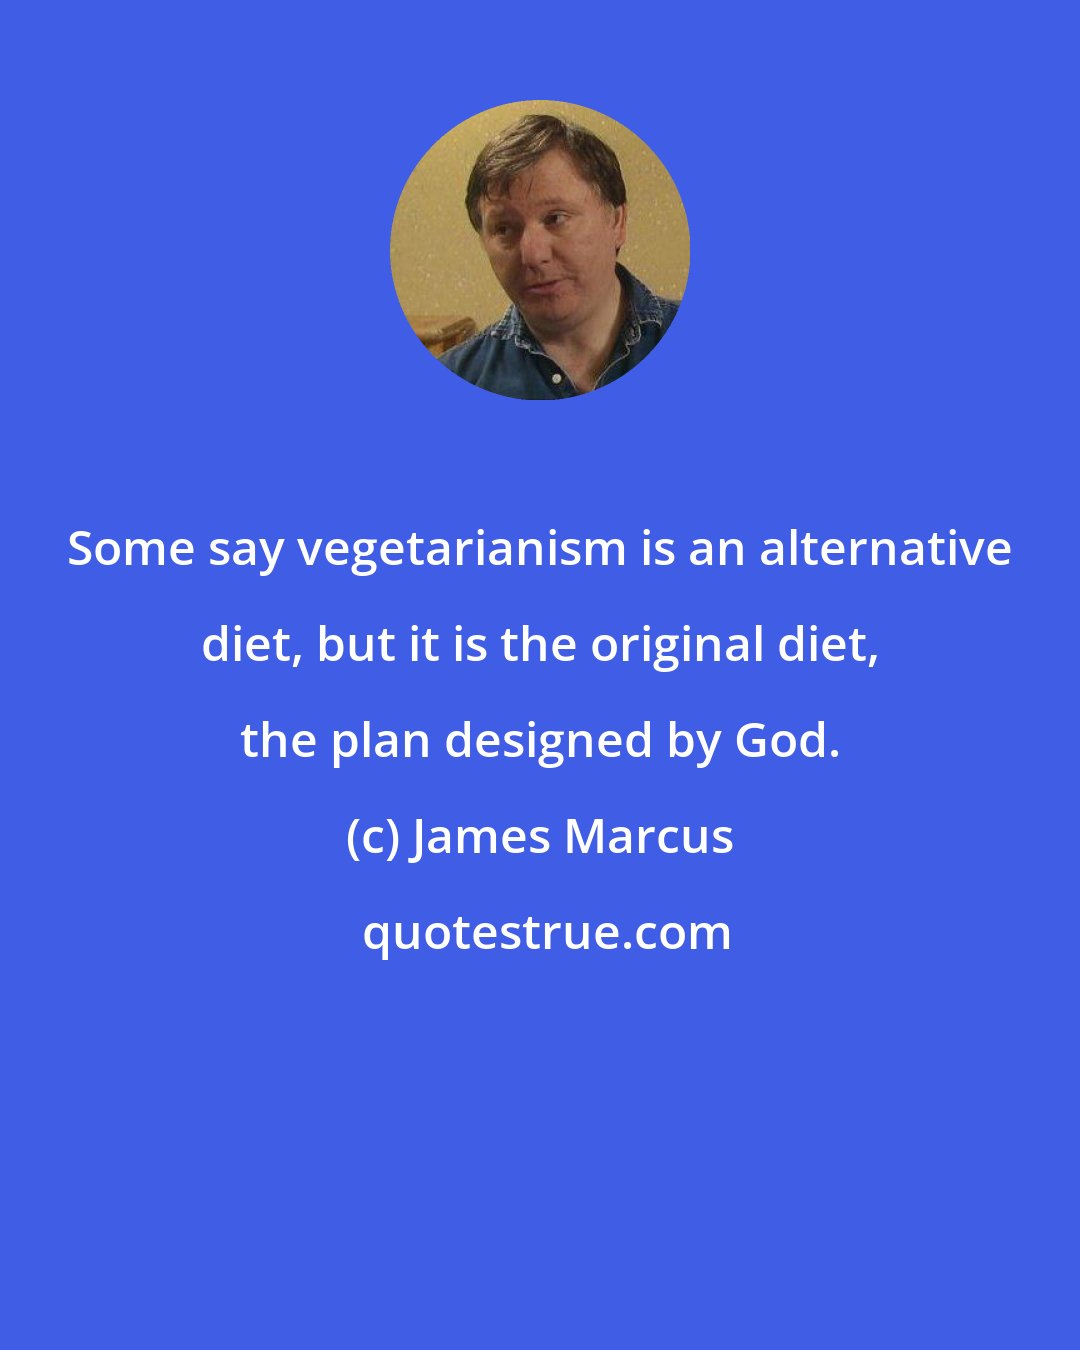 James Marcus: Some say vegetarianism is an alternative diet, but it is the original diet, the plan designed by God.